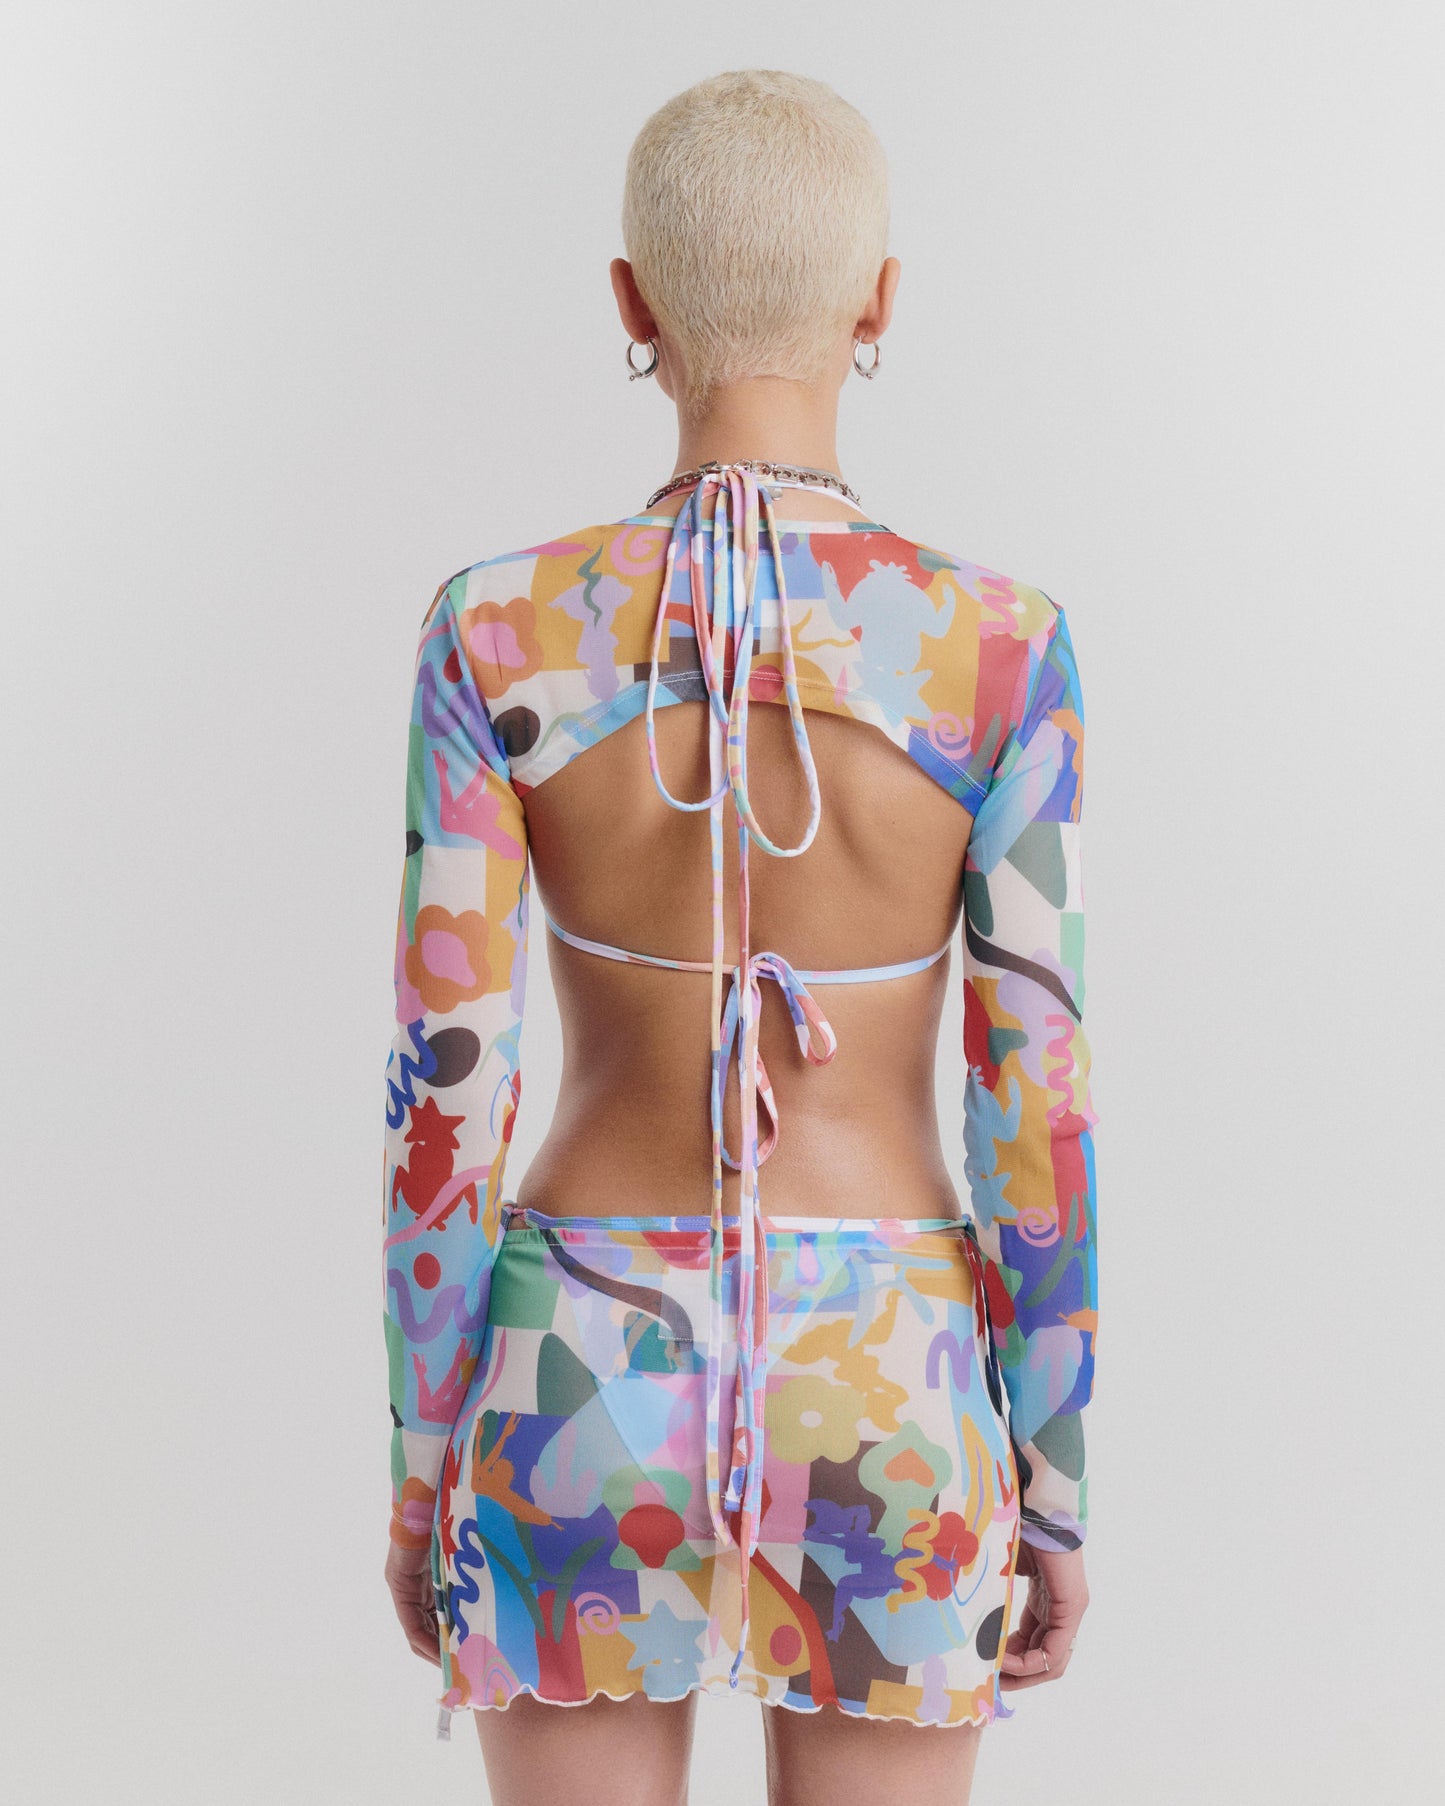 Teeny Mesh Long Sleeve Crop Shrug Top with Graphic Print in Multicolour